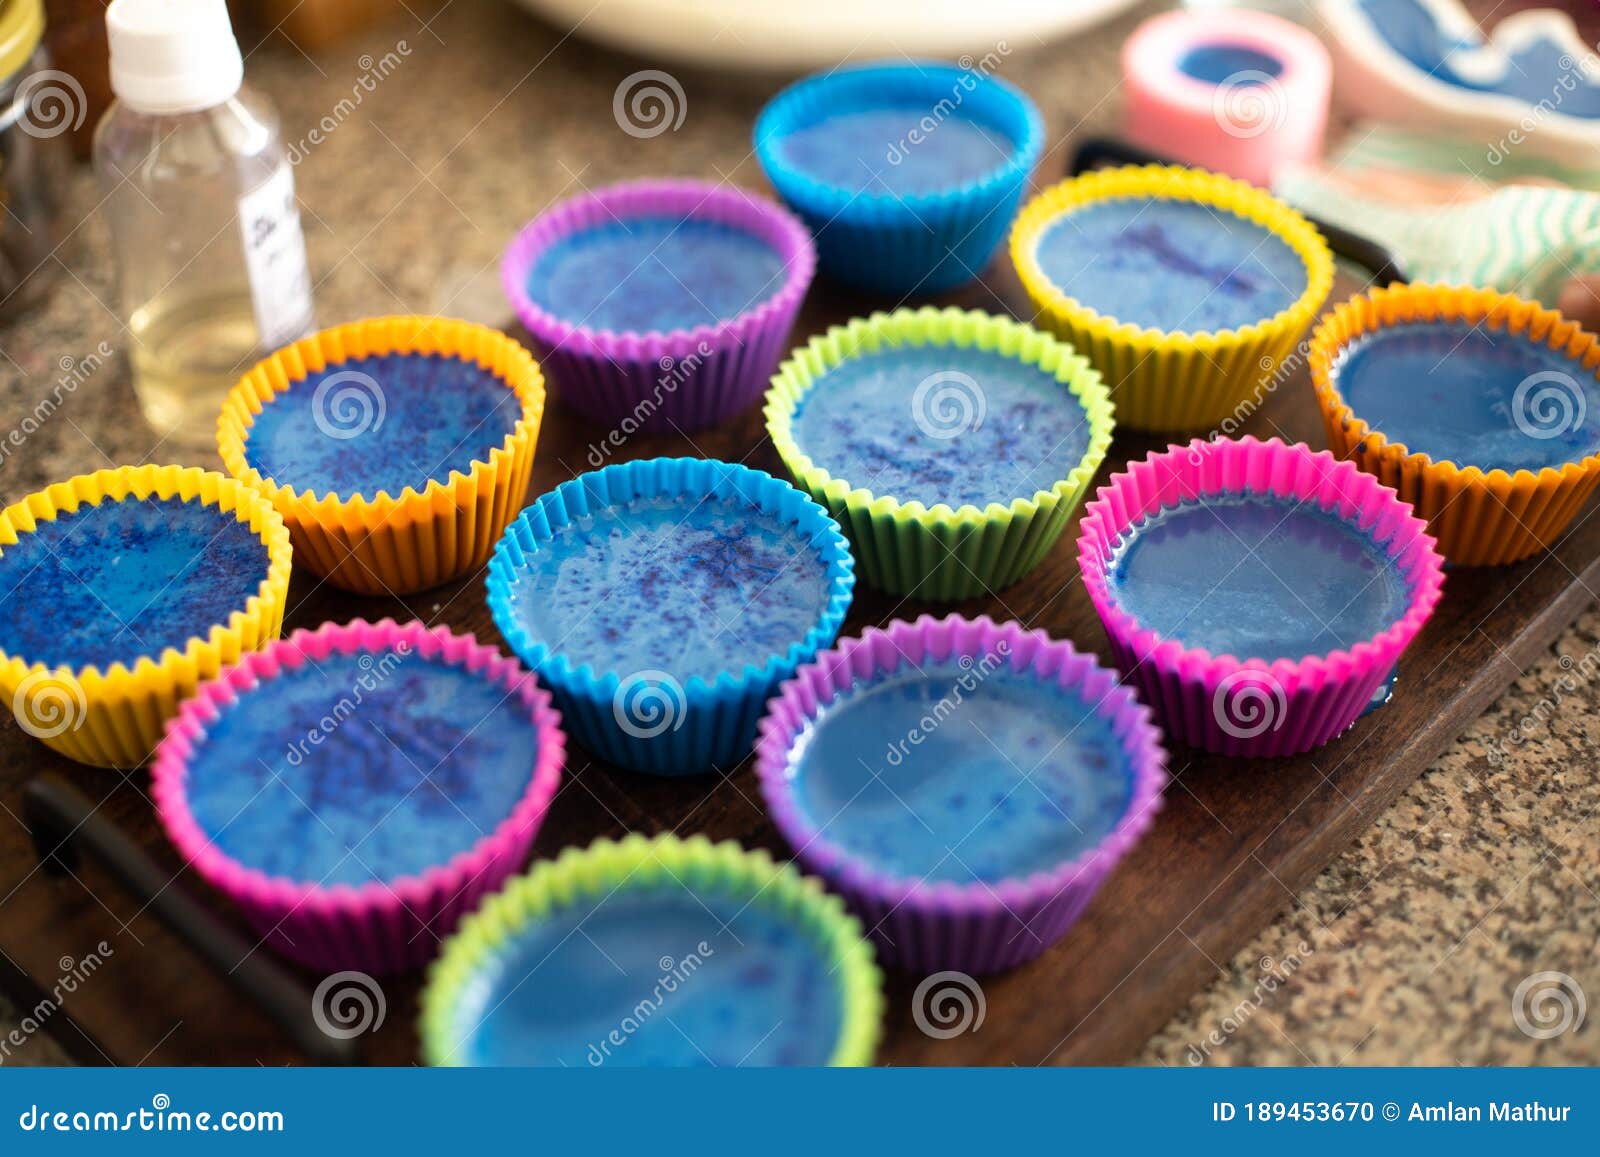 colorful silicon cupcake molds on wooden coard filled with liquid soap for a home made hobby of melt and pour soapmaking